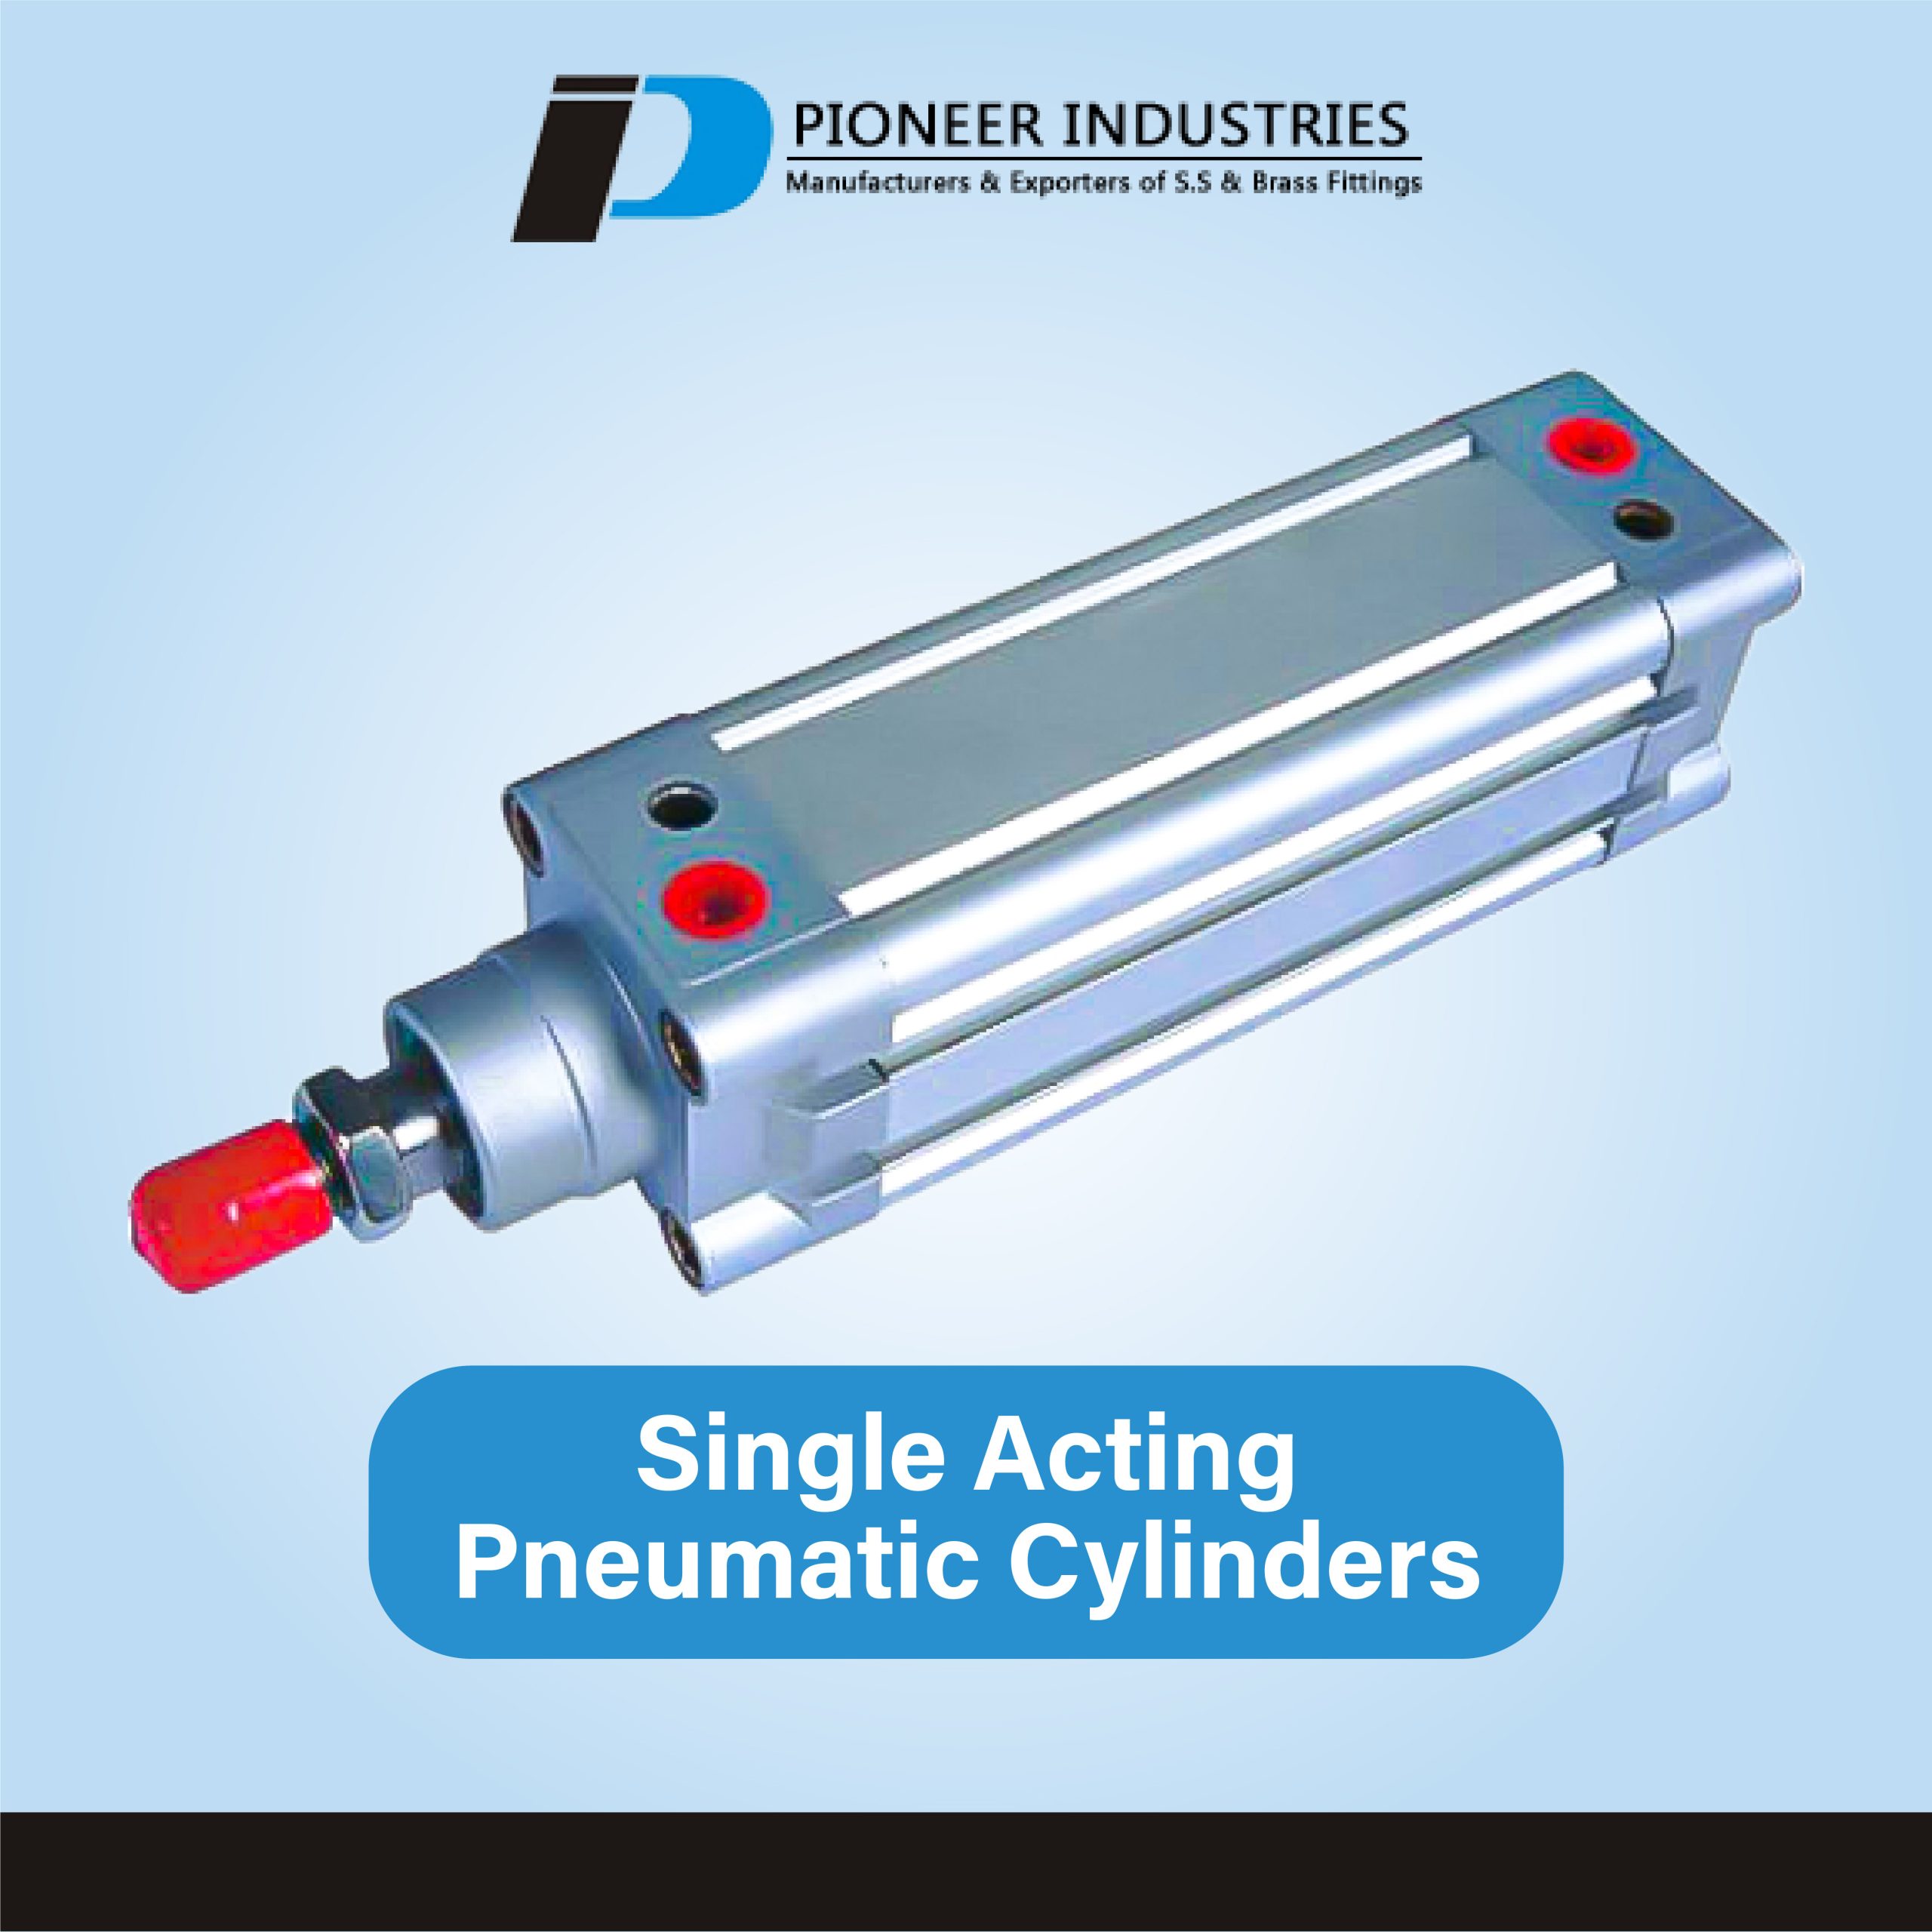 Single Acting Pneumatic Cylinders